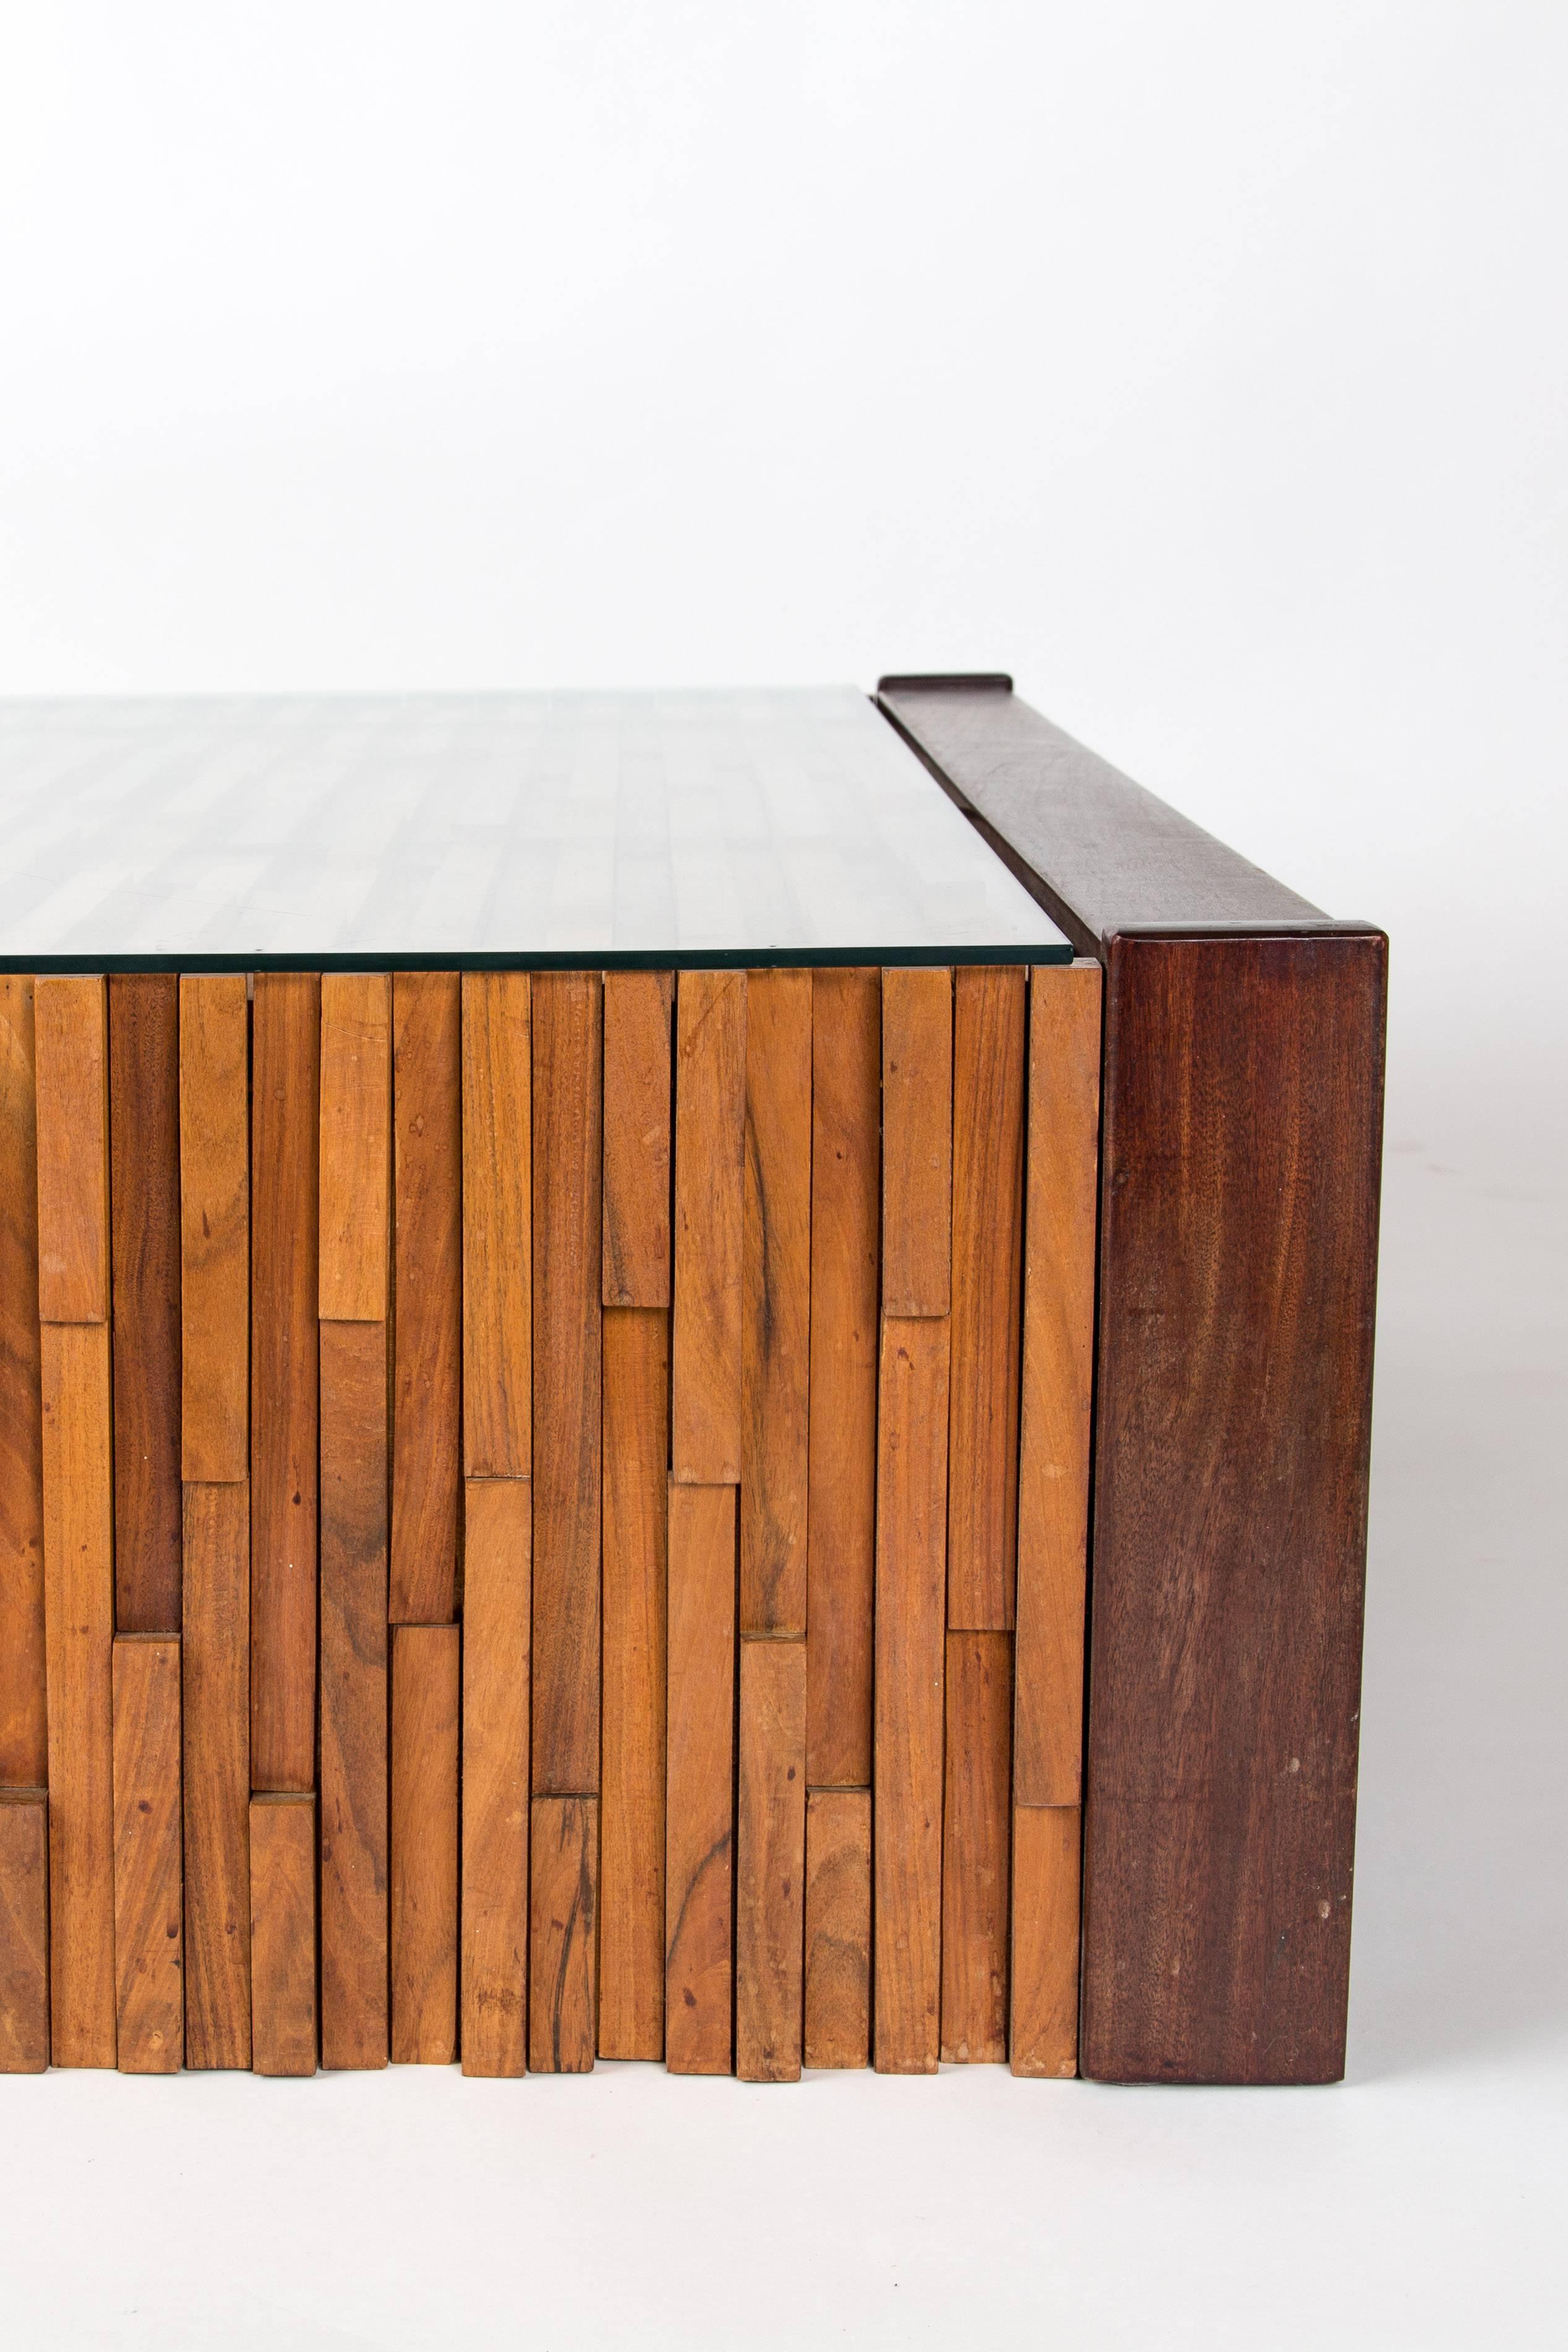 Brutalist PERCIFAL LAFER mixed tropical wood coffee table, Brazilian brutalist style 